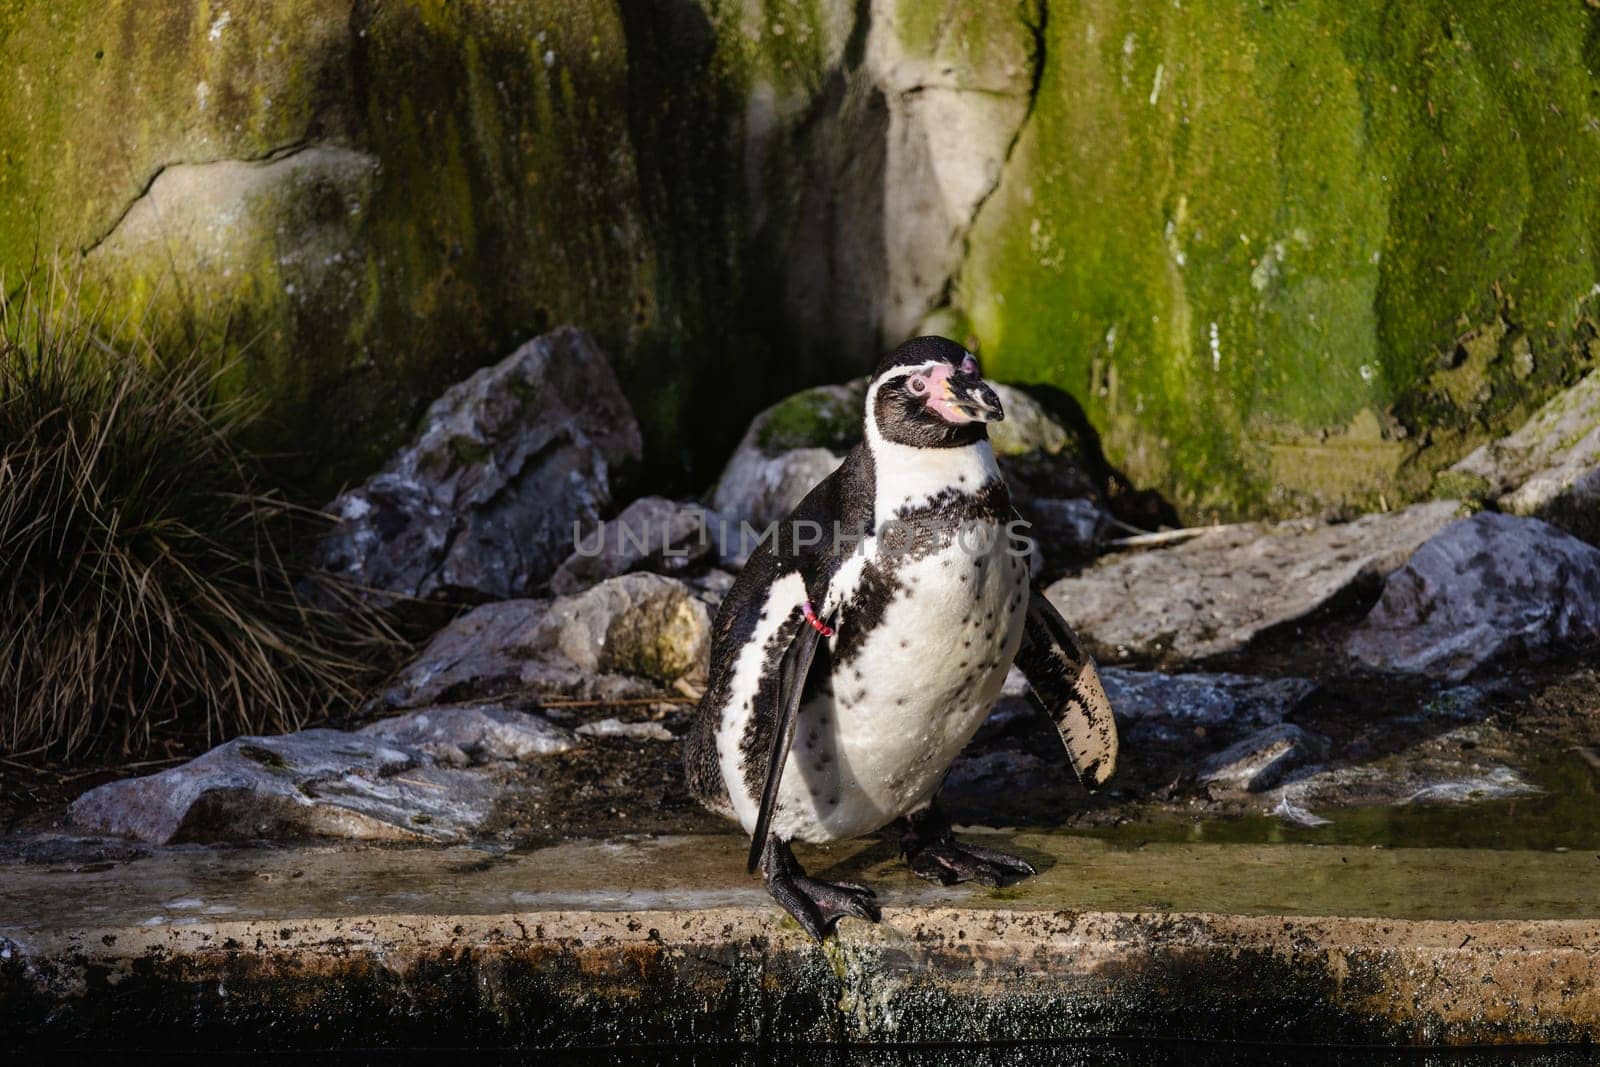 Humboldt Penguin Standing by a Rocky Pool With Algae-Covered Background by exndiver